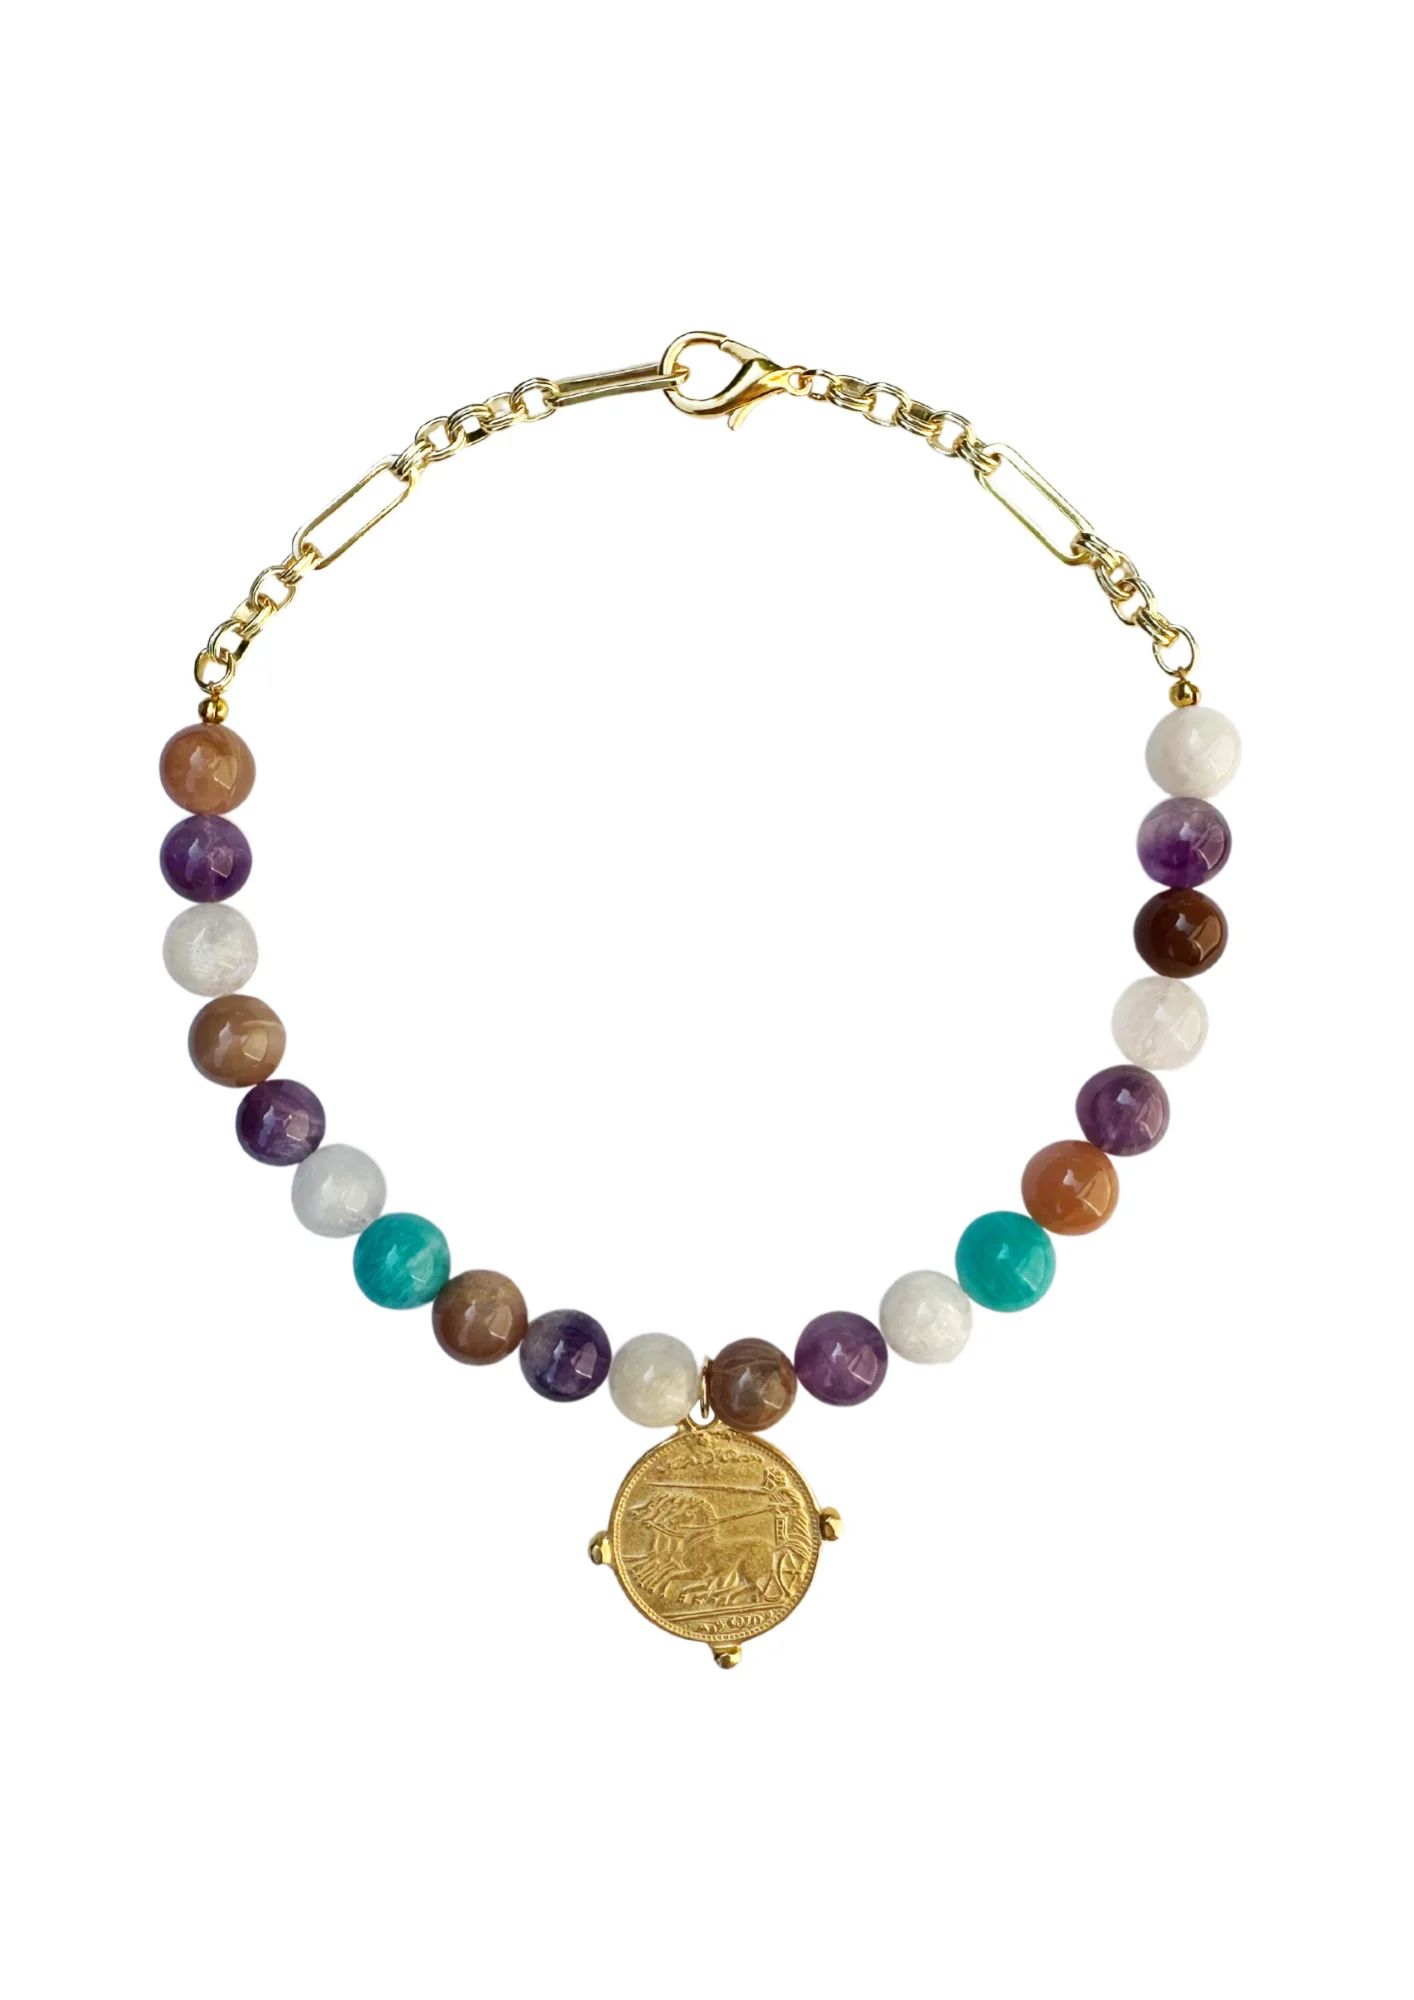 Limited Edition: Multicolored Bead & Chain Pendant Necklace | Nicola Bathie Jewelry